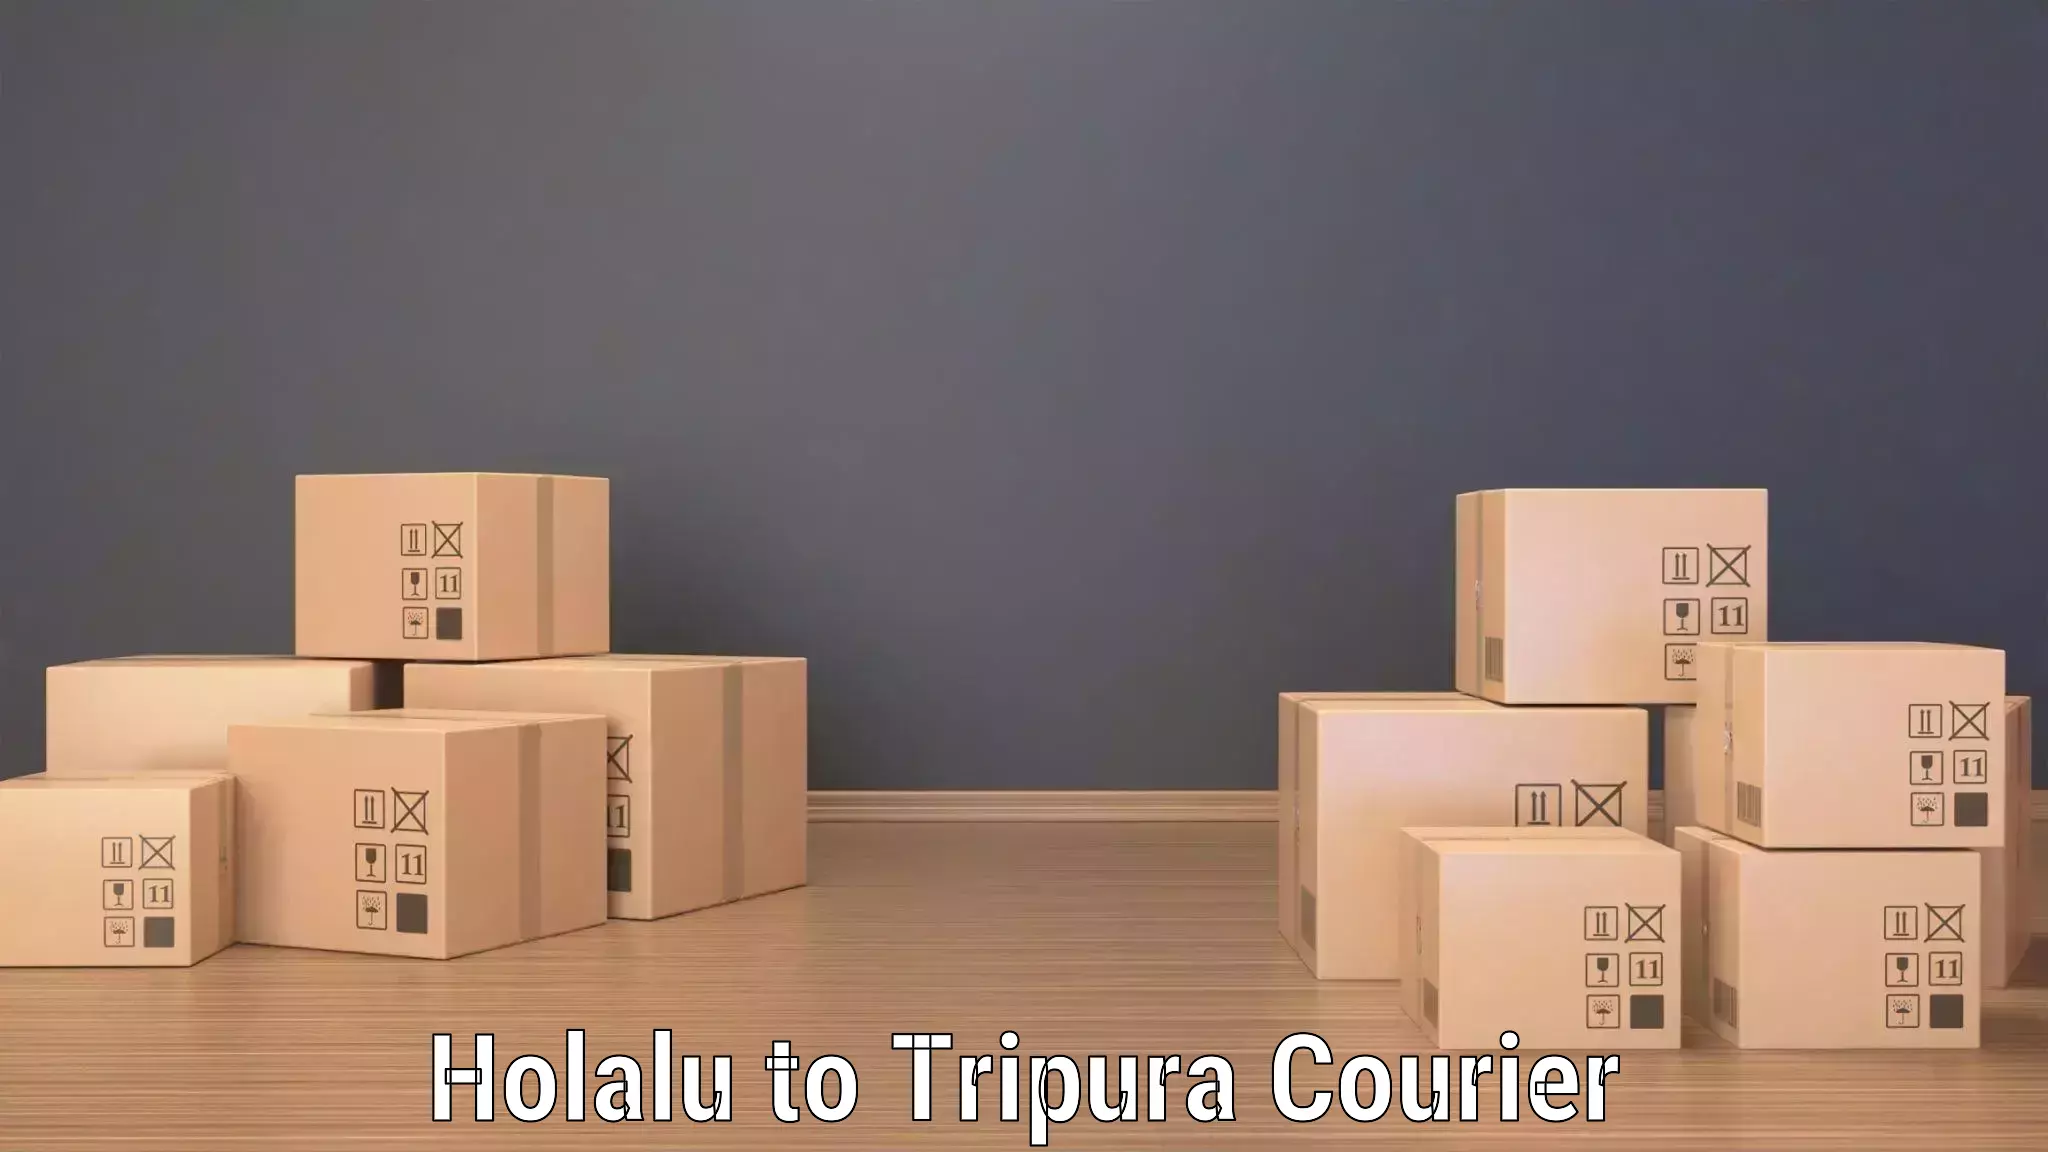 High-capacity parcel service Holalu to West Tripura